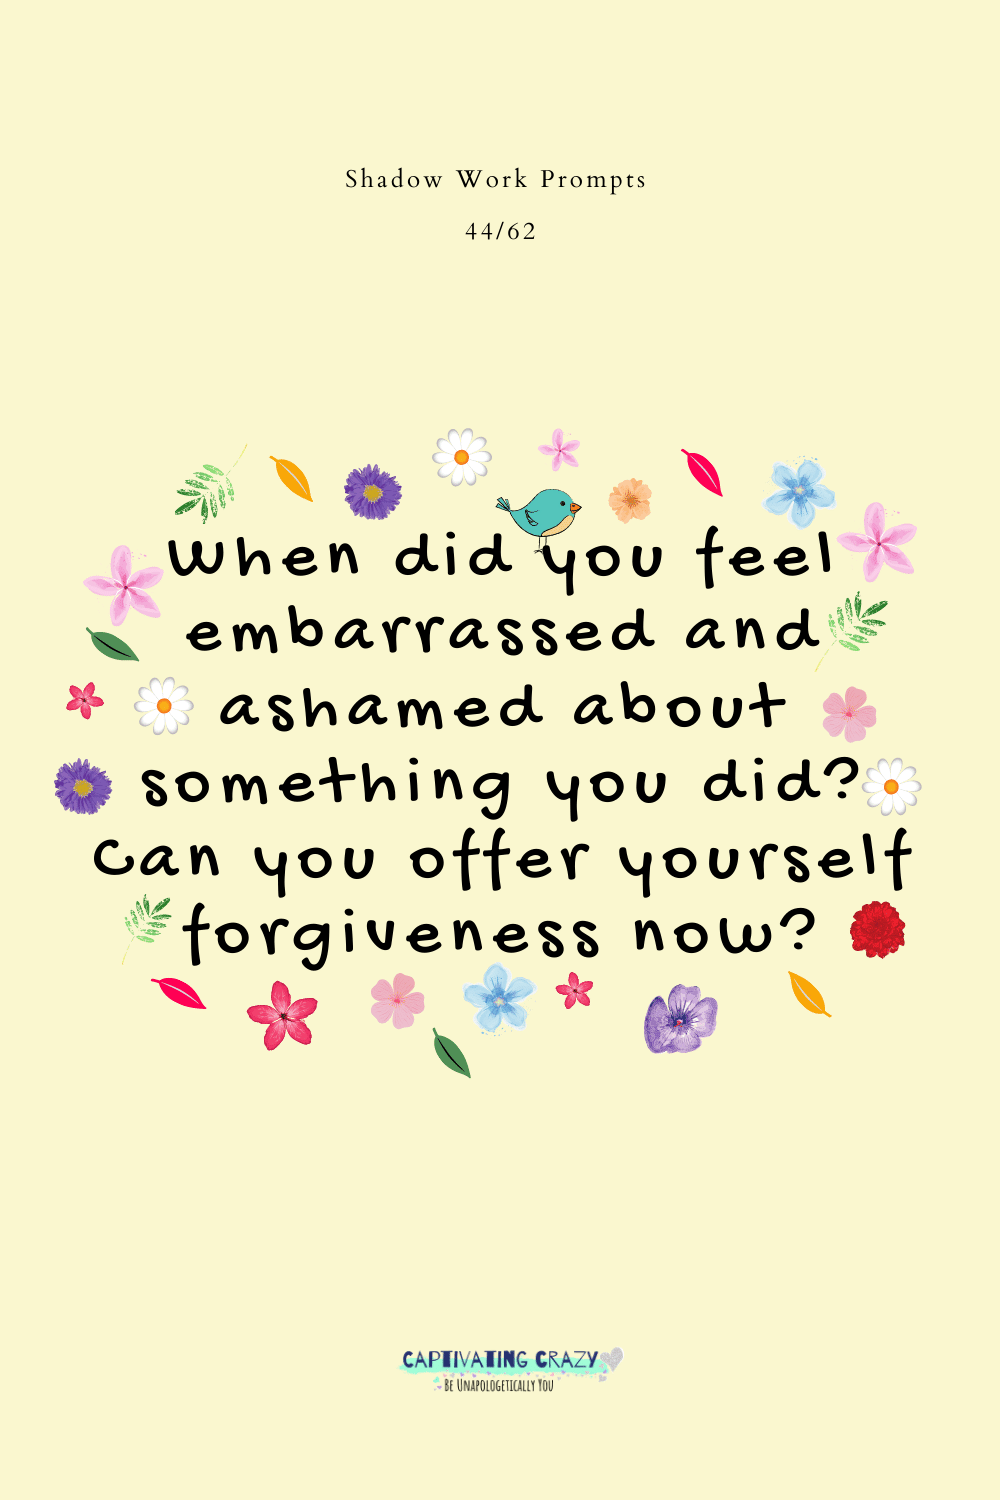 When did you feel embarrassed and ashamed about something you did? Can you offer yourself forgiveness now?